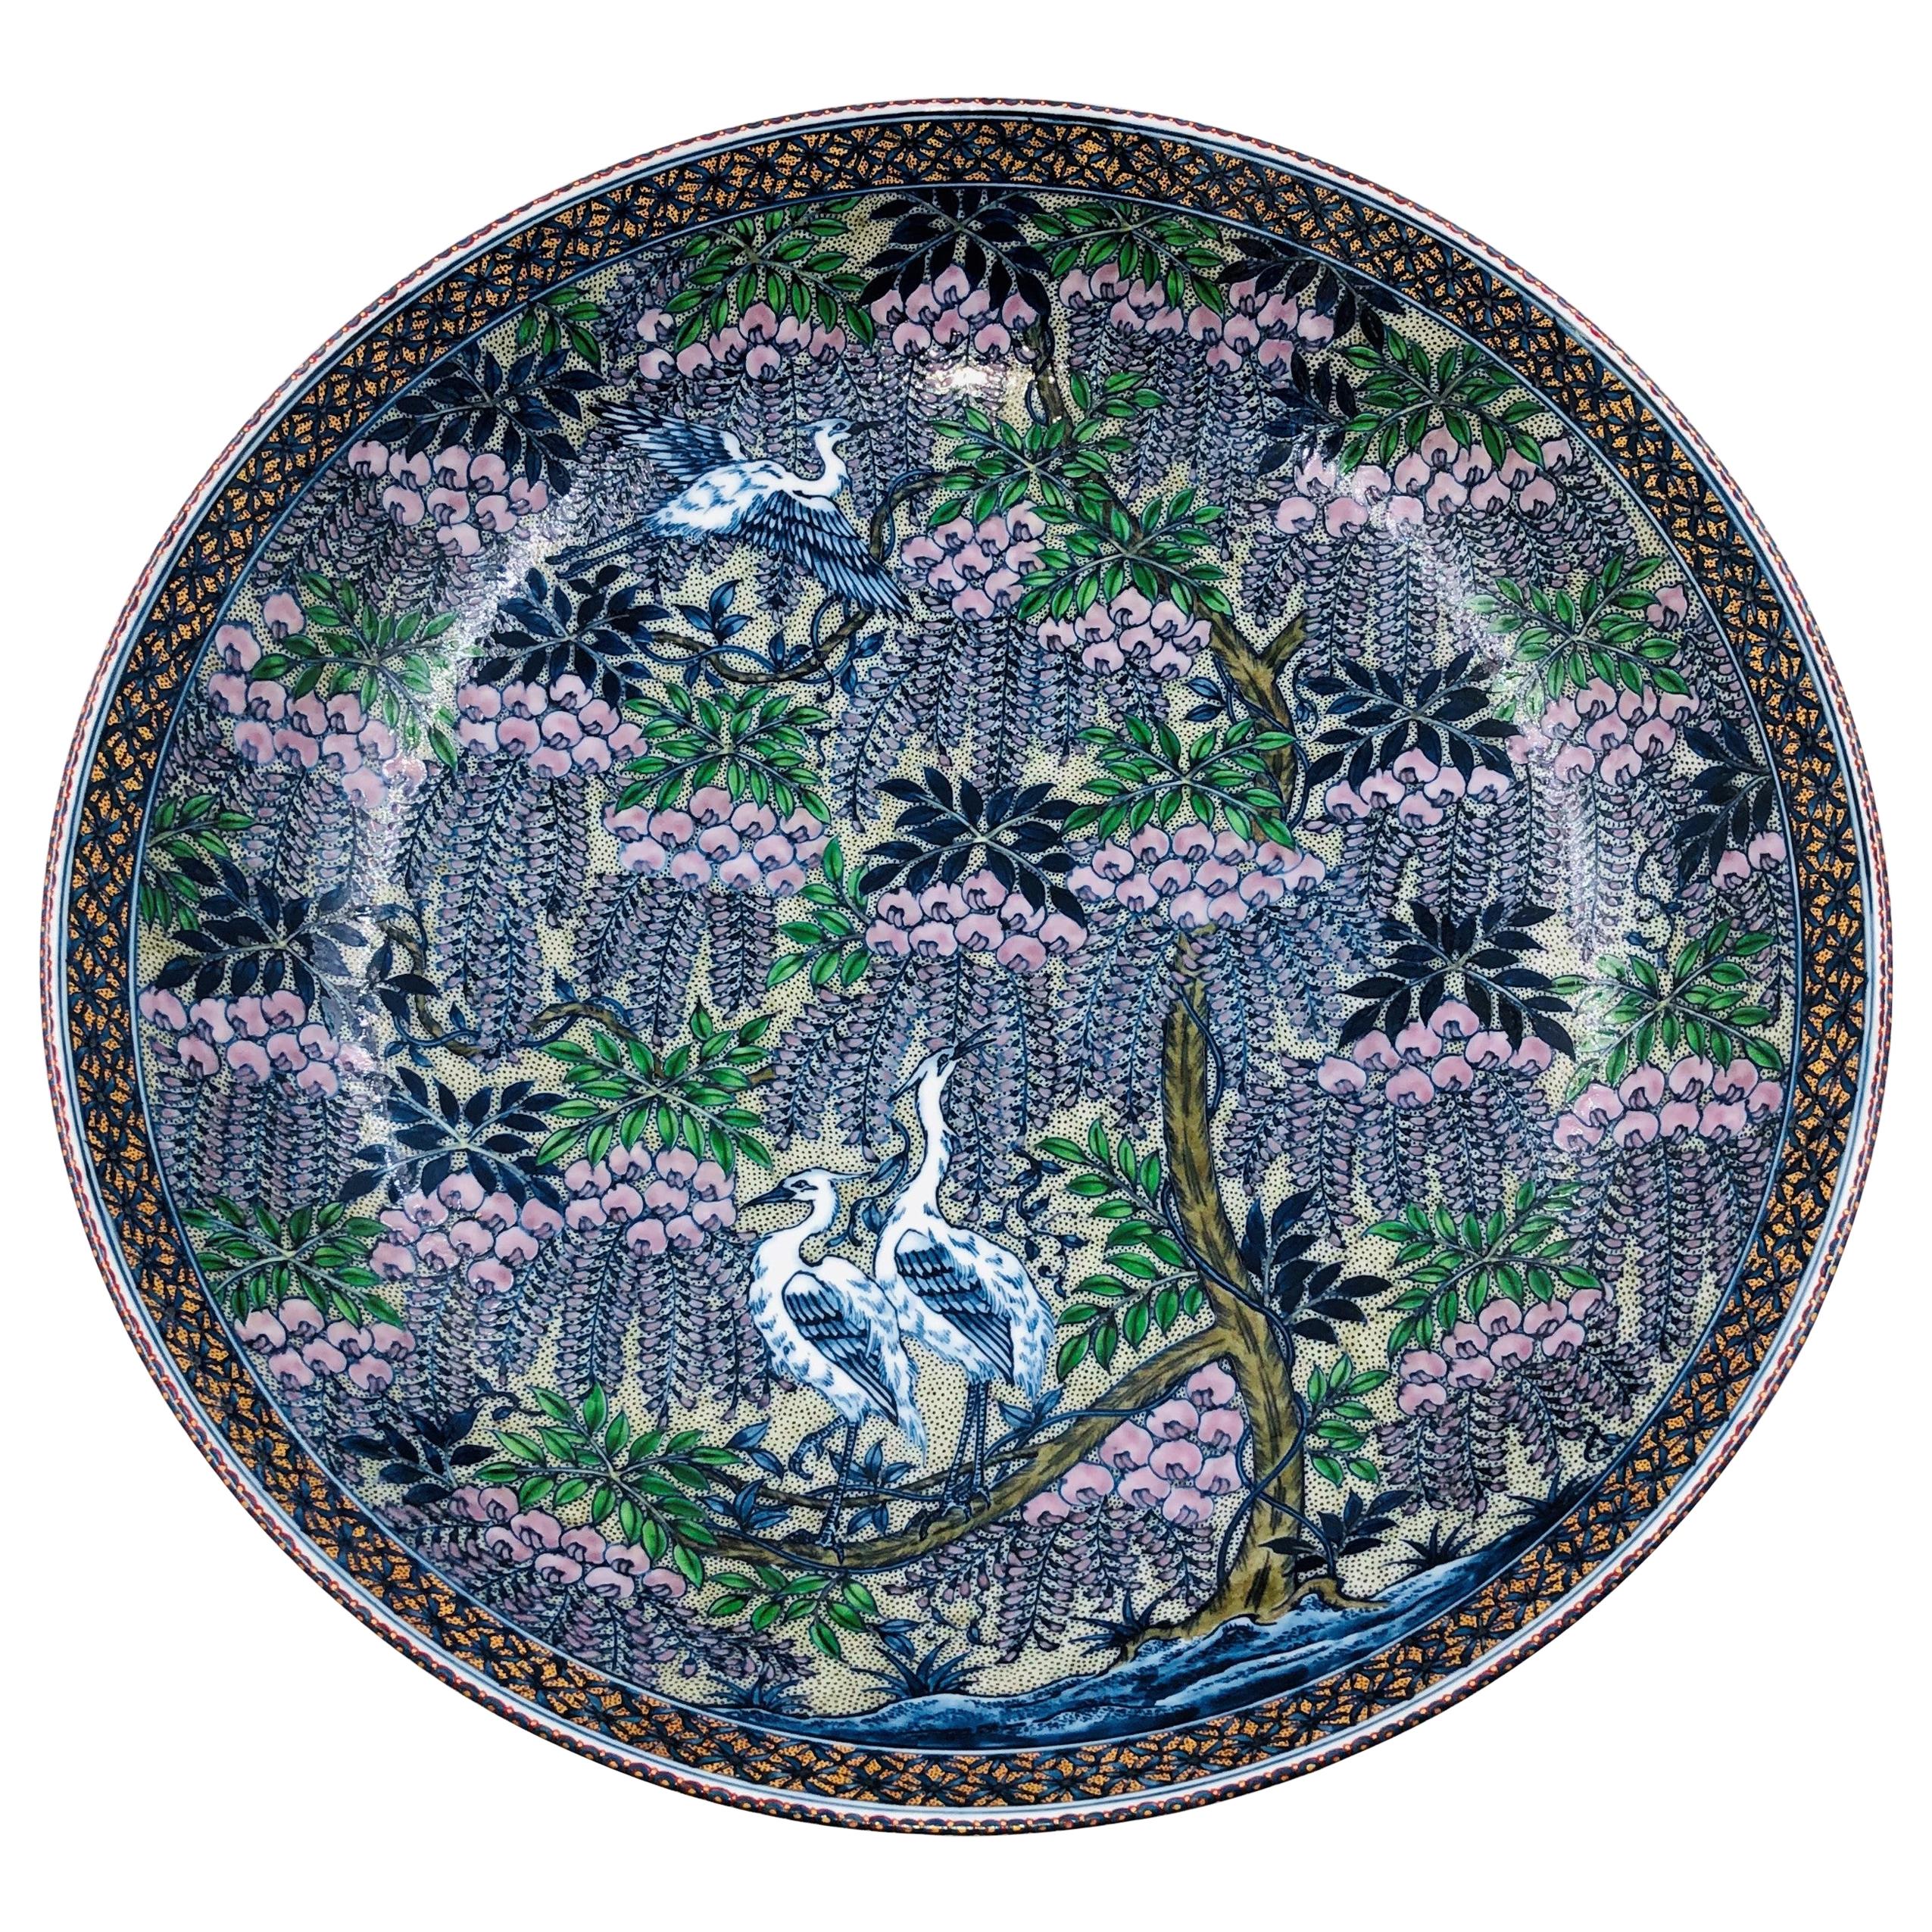 Green Purple Porcelain Charger by Japanese Contemporary Master Artist